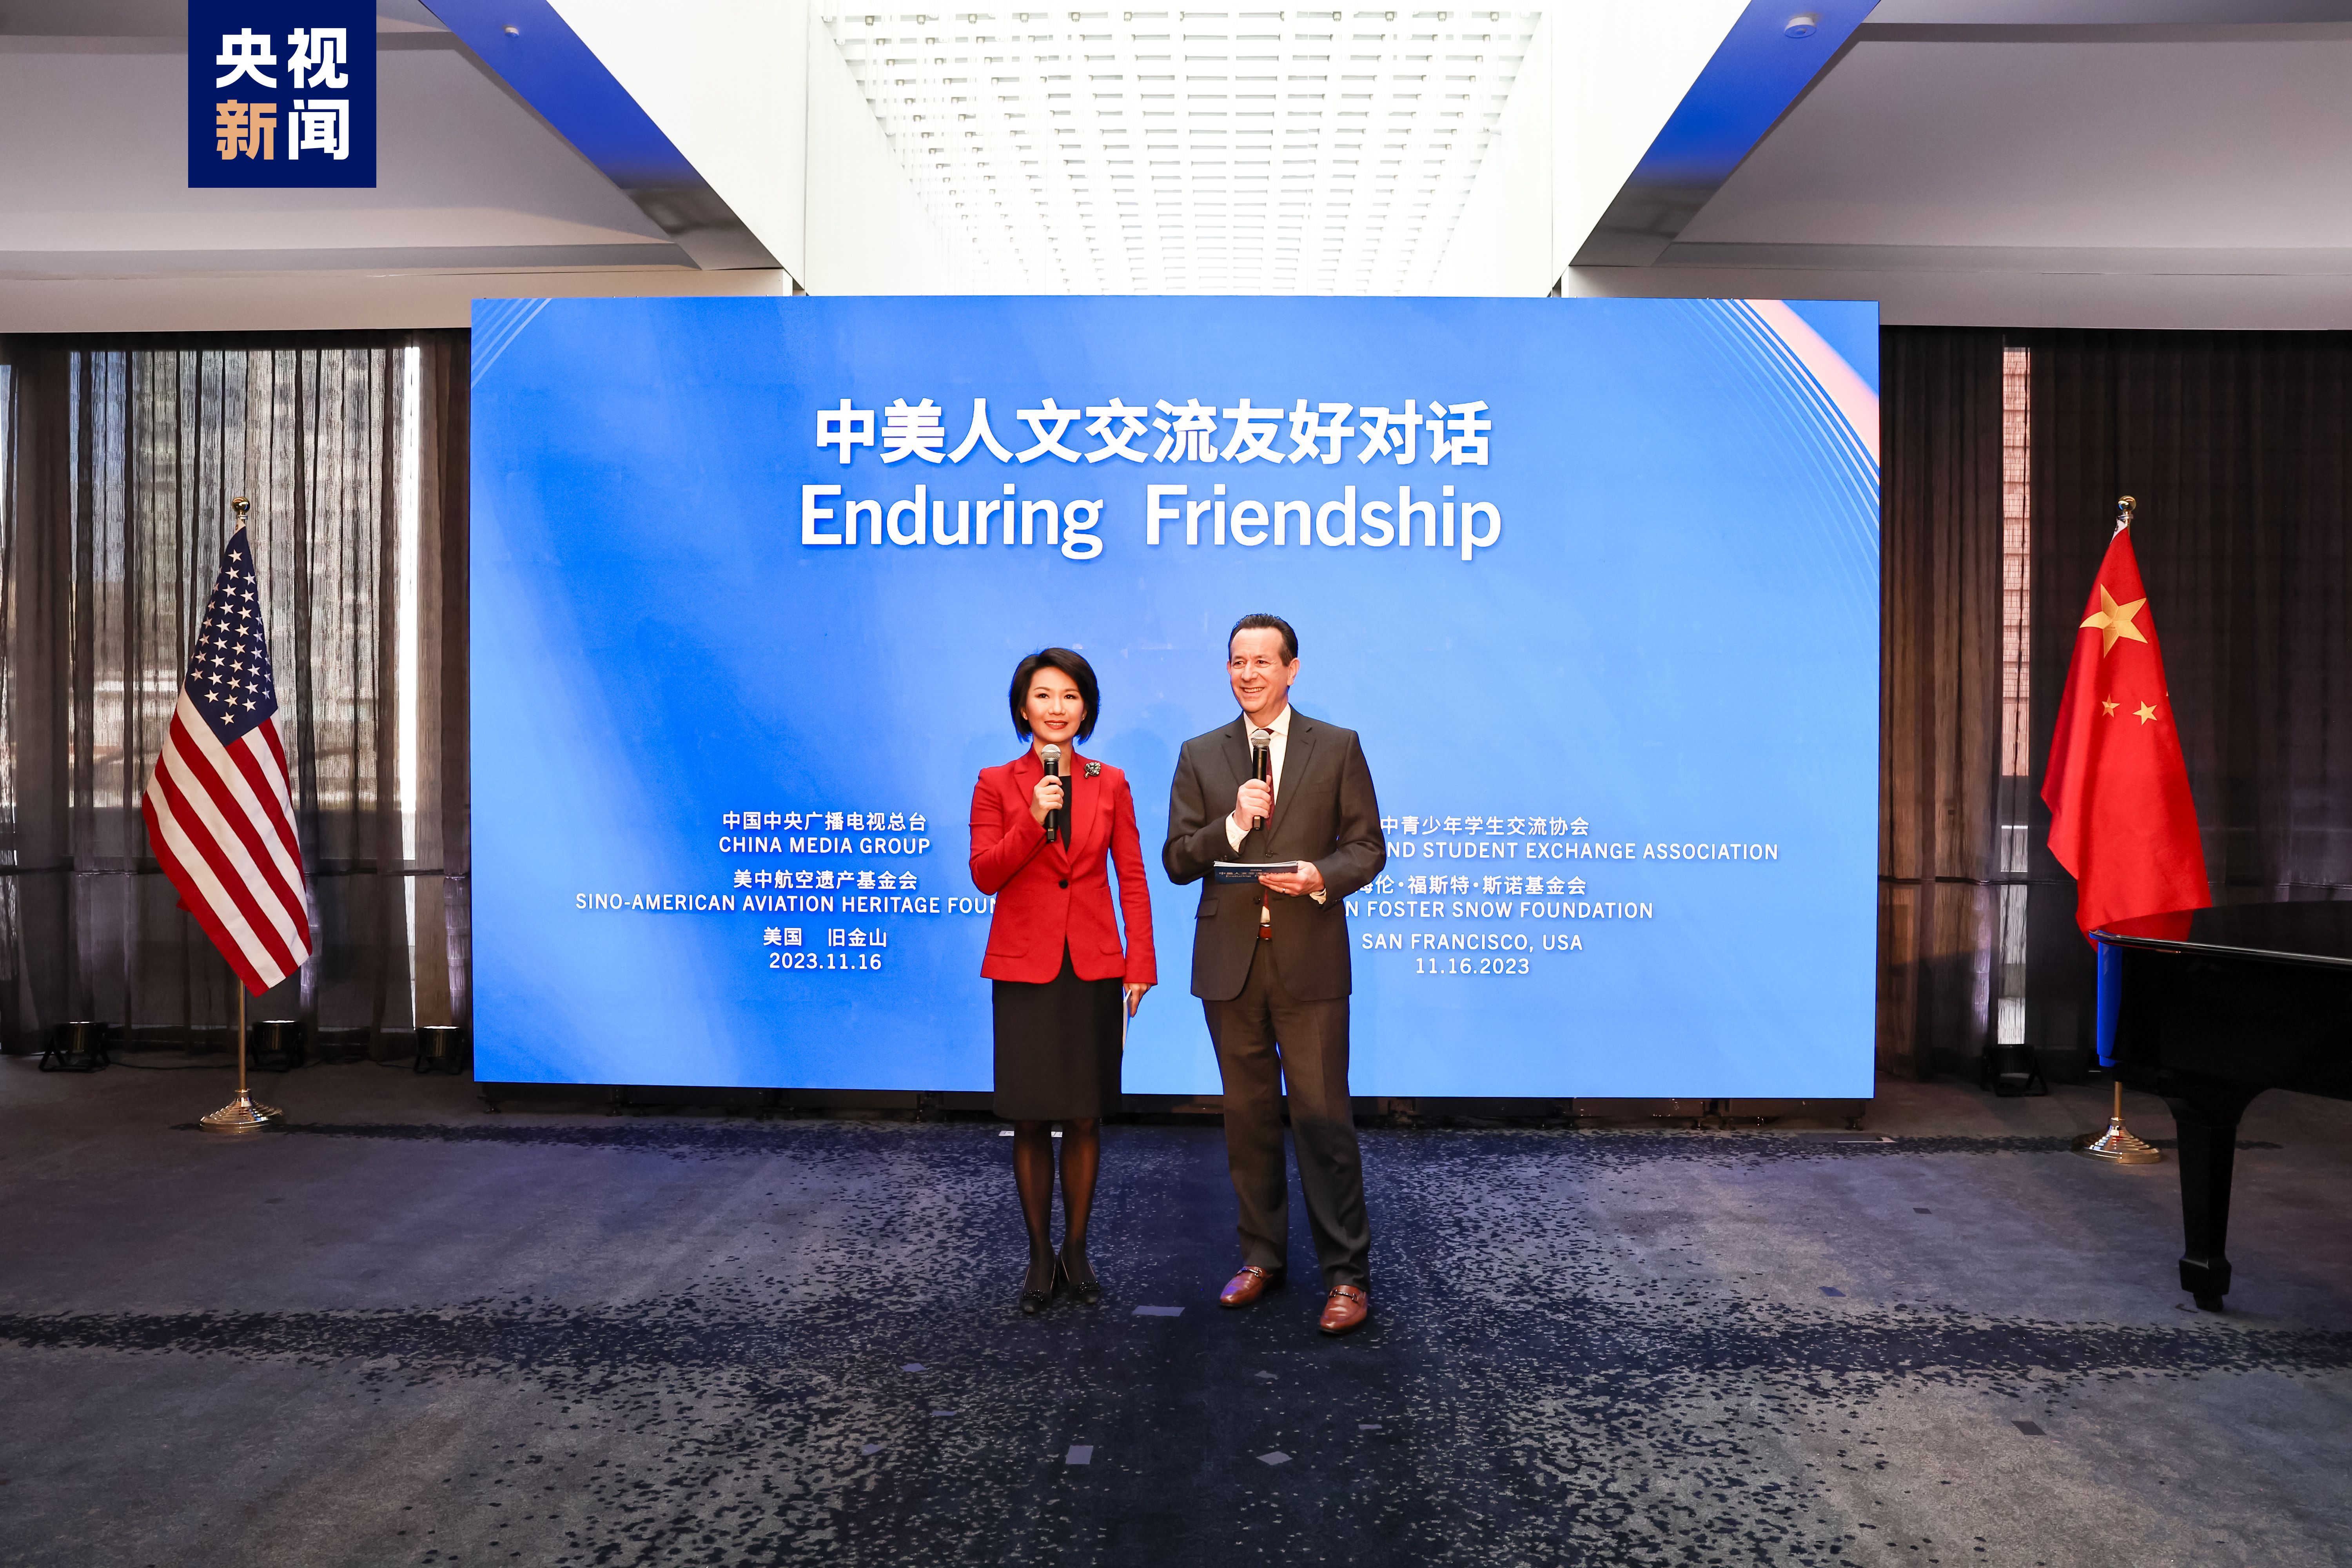 China Media Group (CMG) and organizations including the U.S.-China Youth and Student Exchange Association jointly held the 